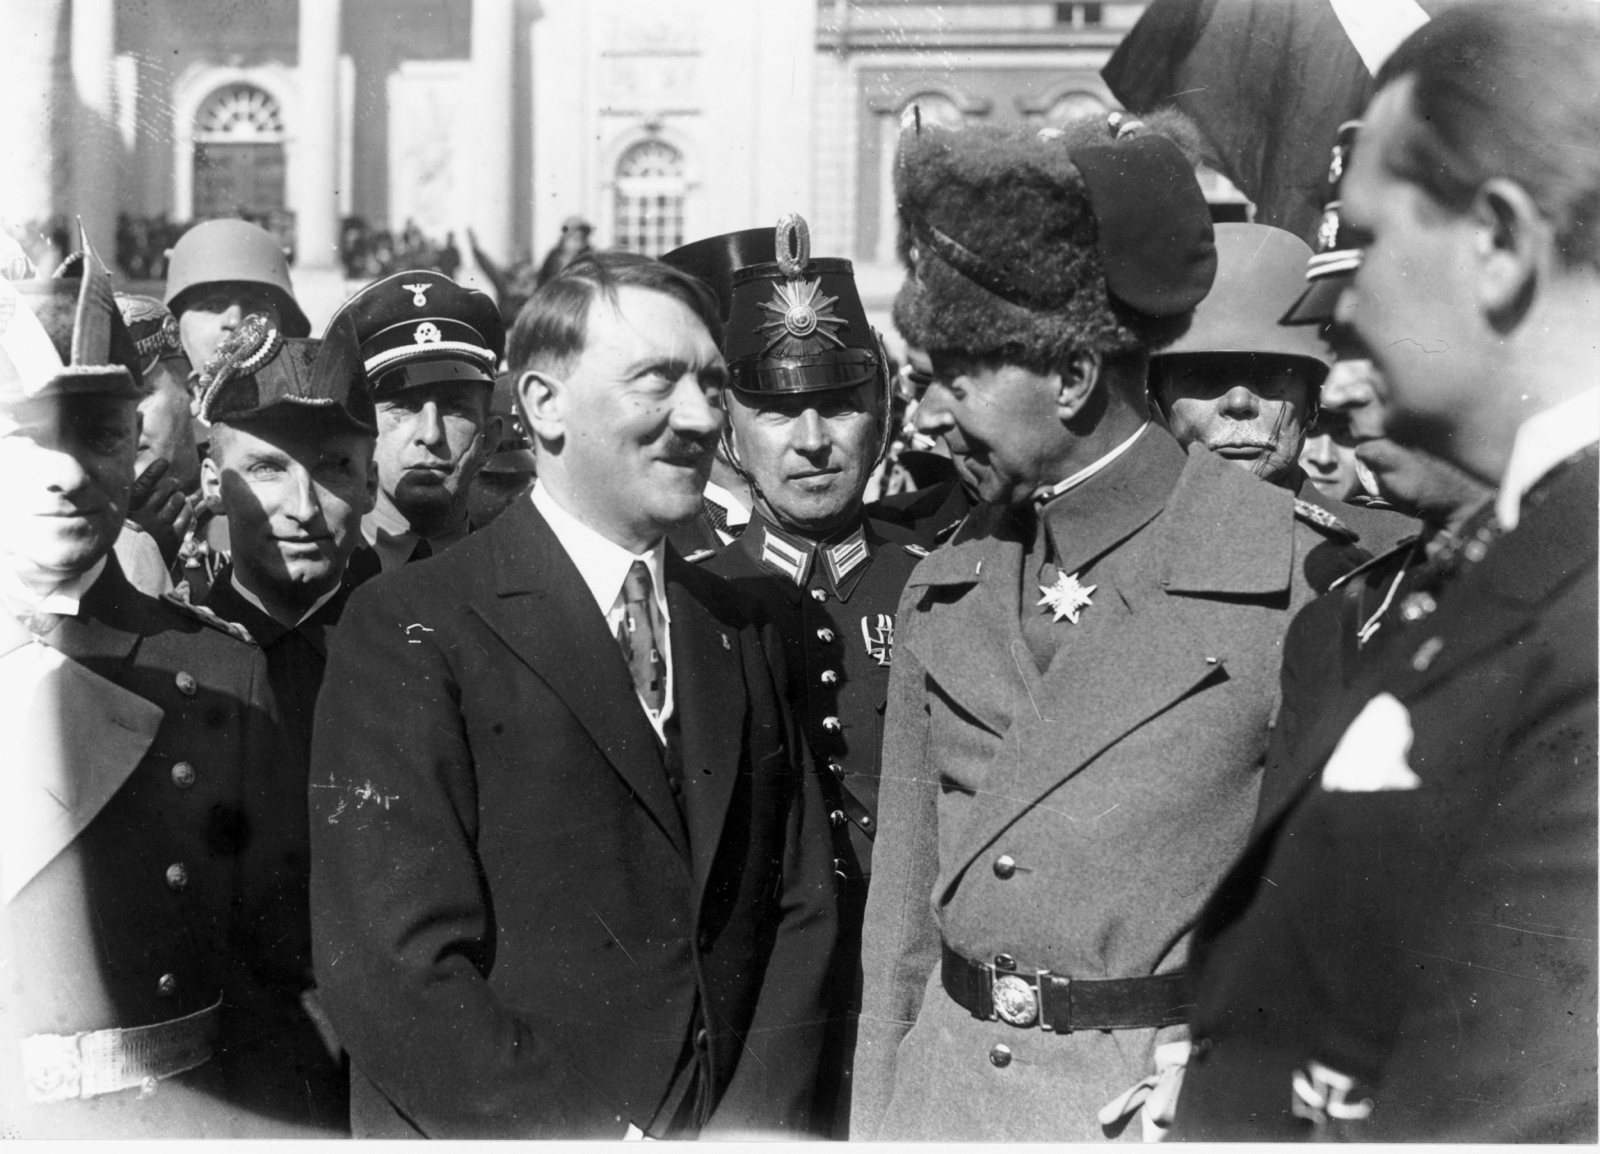 Adolf Hitler and ‘Crown Prince’ Wilhelm during the Day of Potsdam celebrations, Potsdam, Germany, March 21, 1933